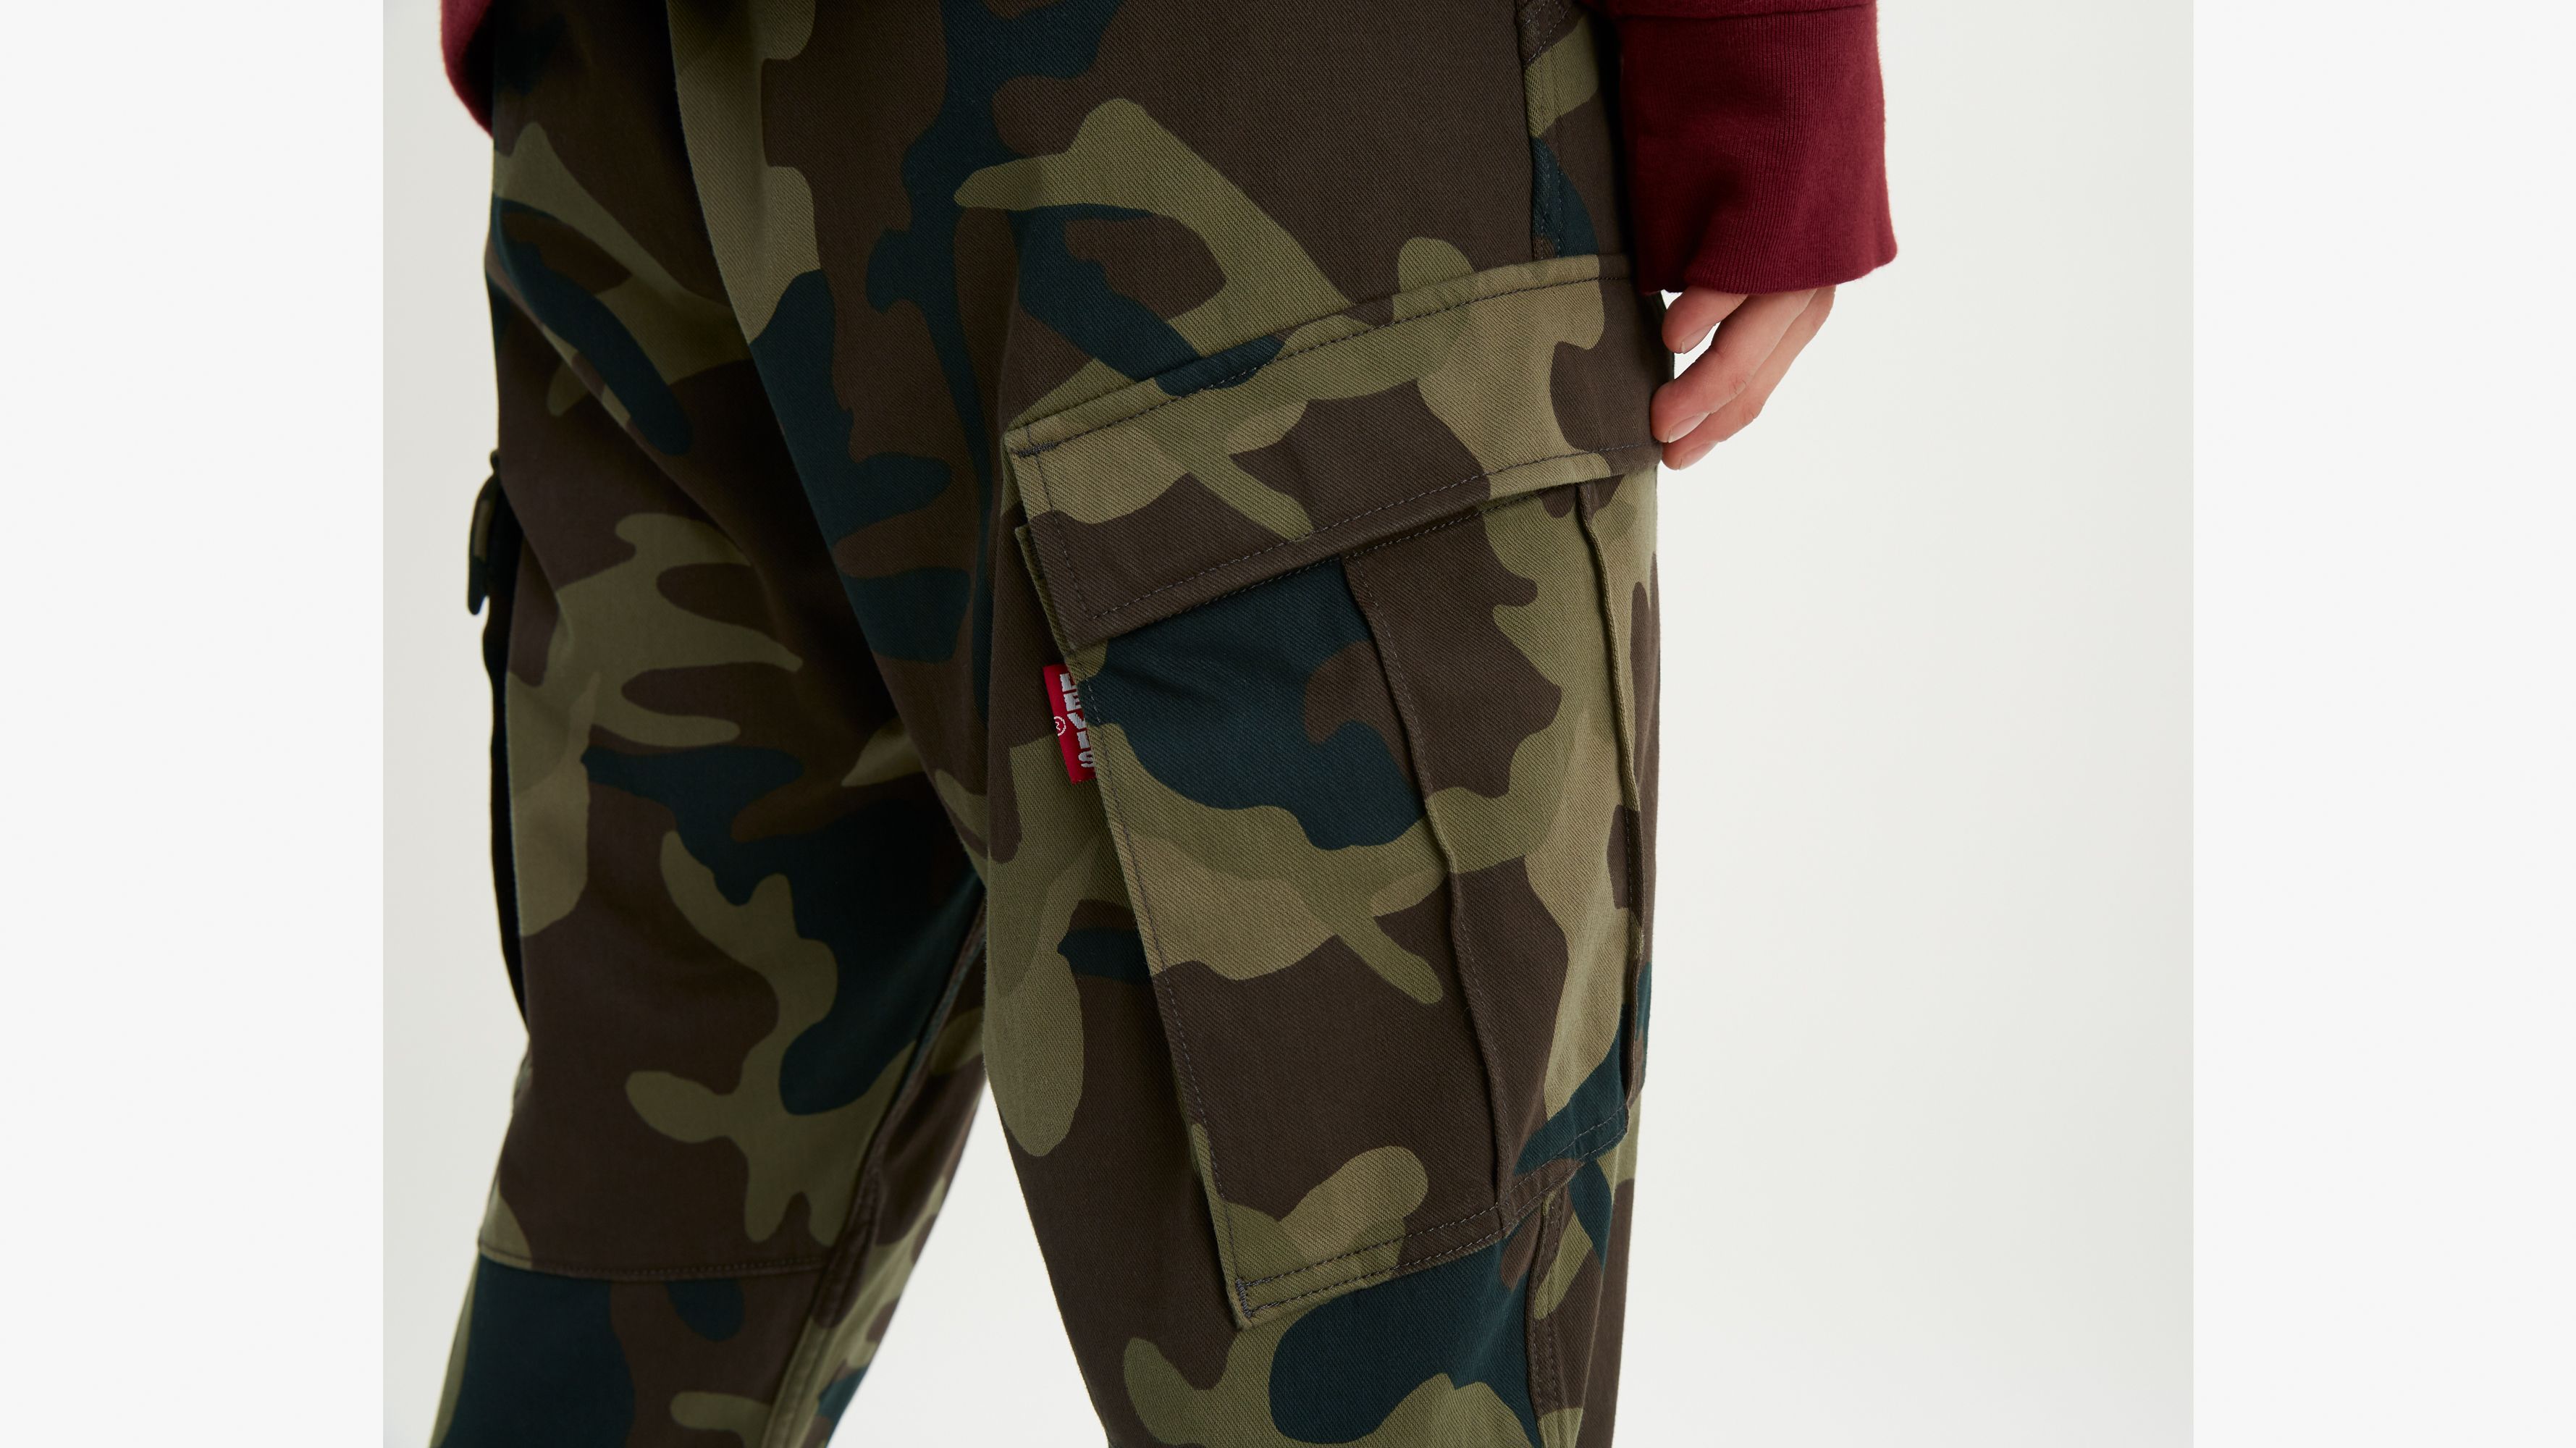 Lo-ball Stack Cargo Pants - Multi-color | Levi's® US